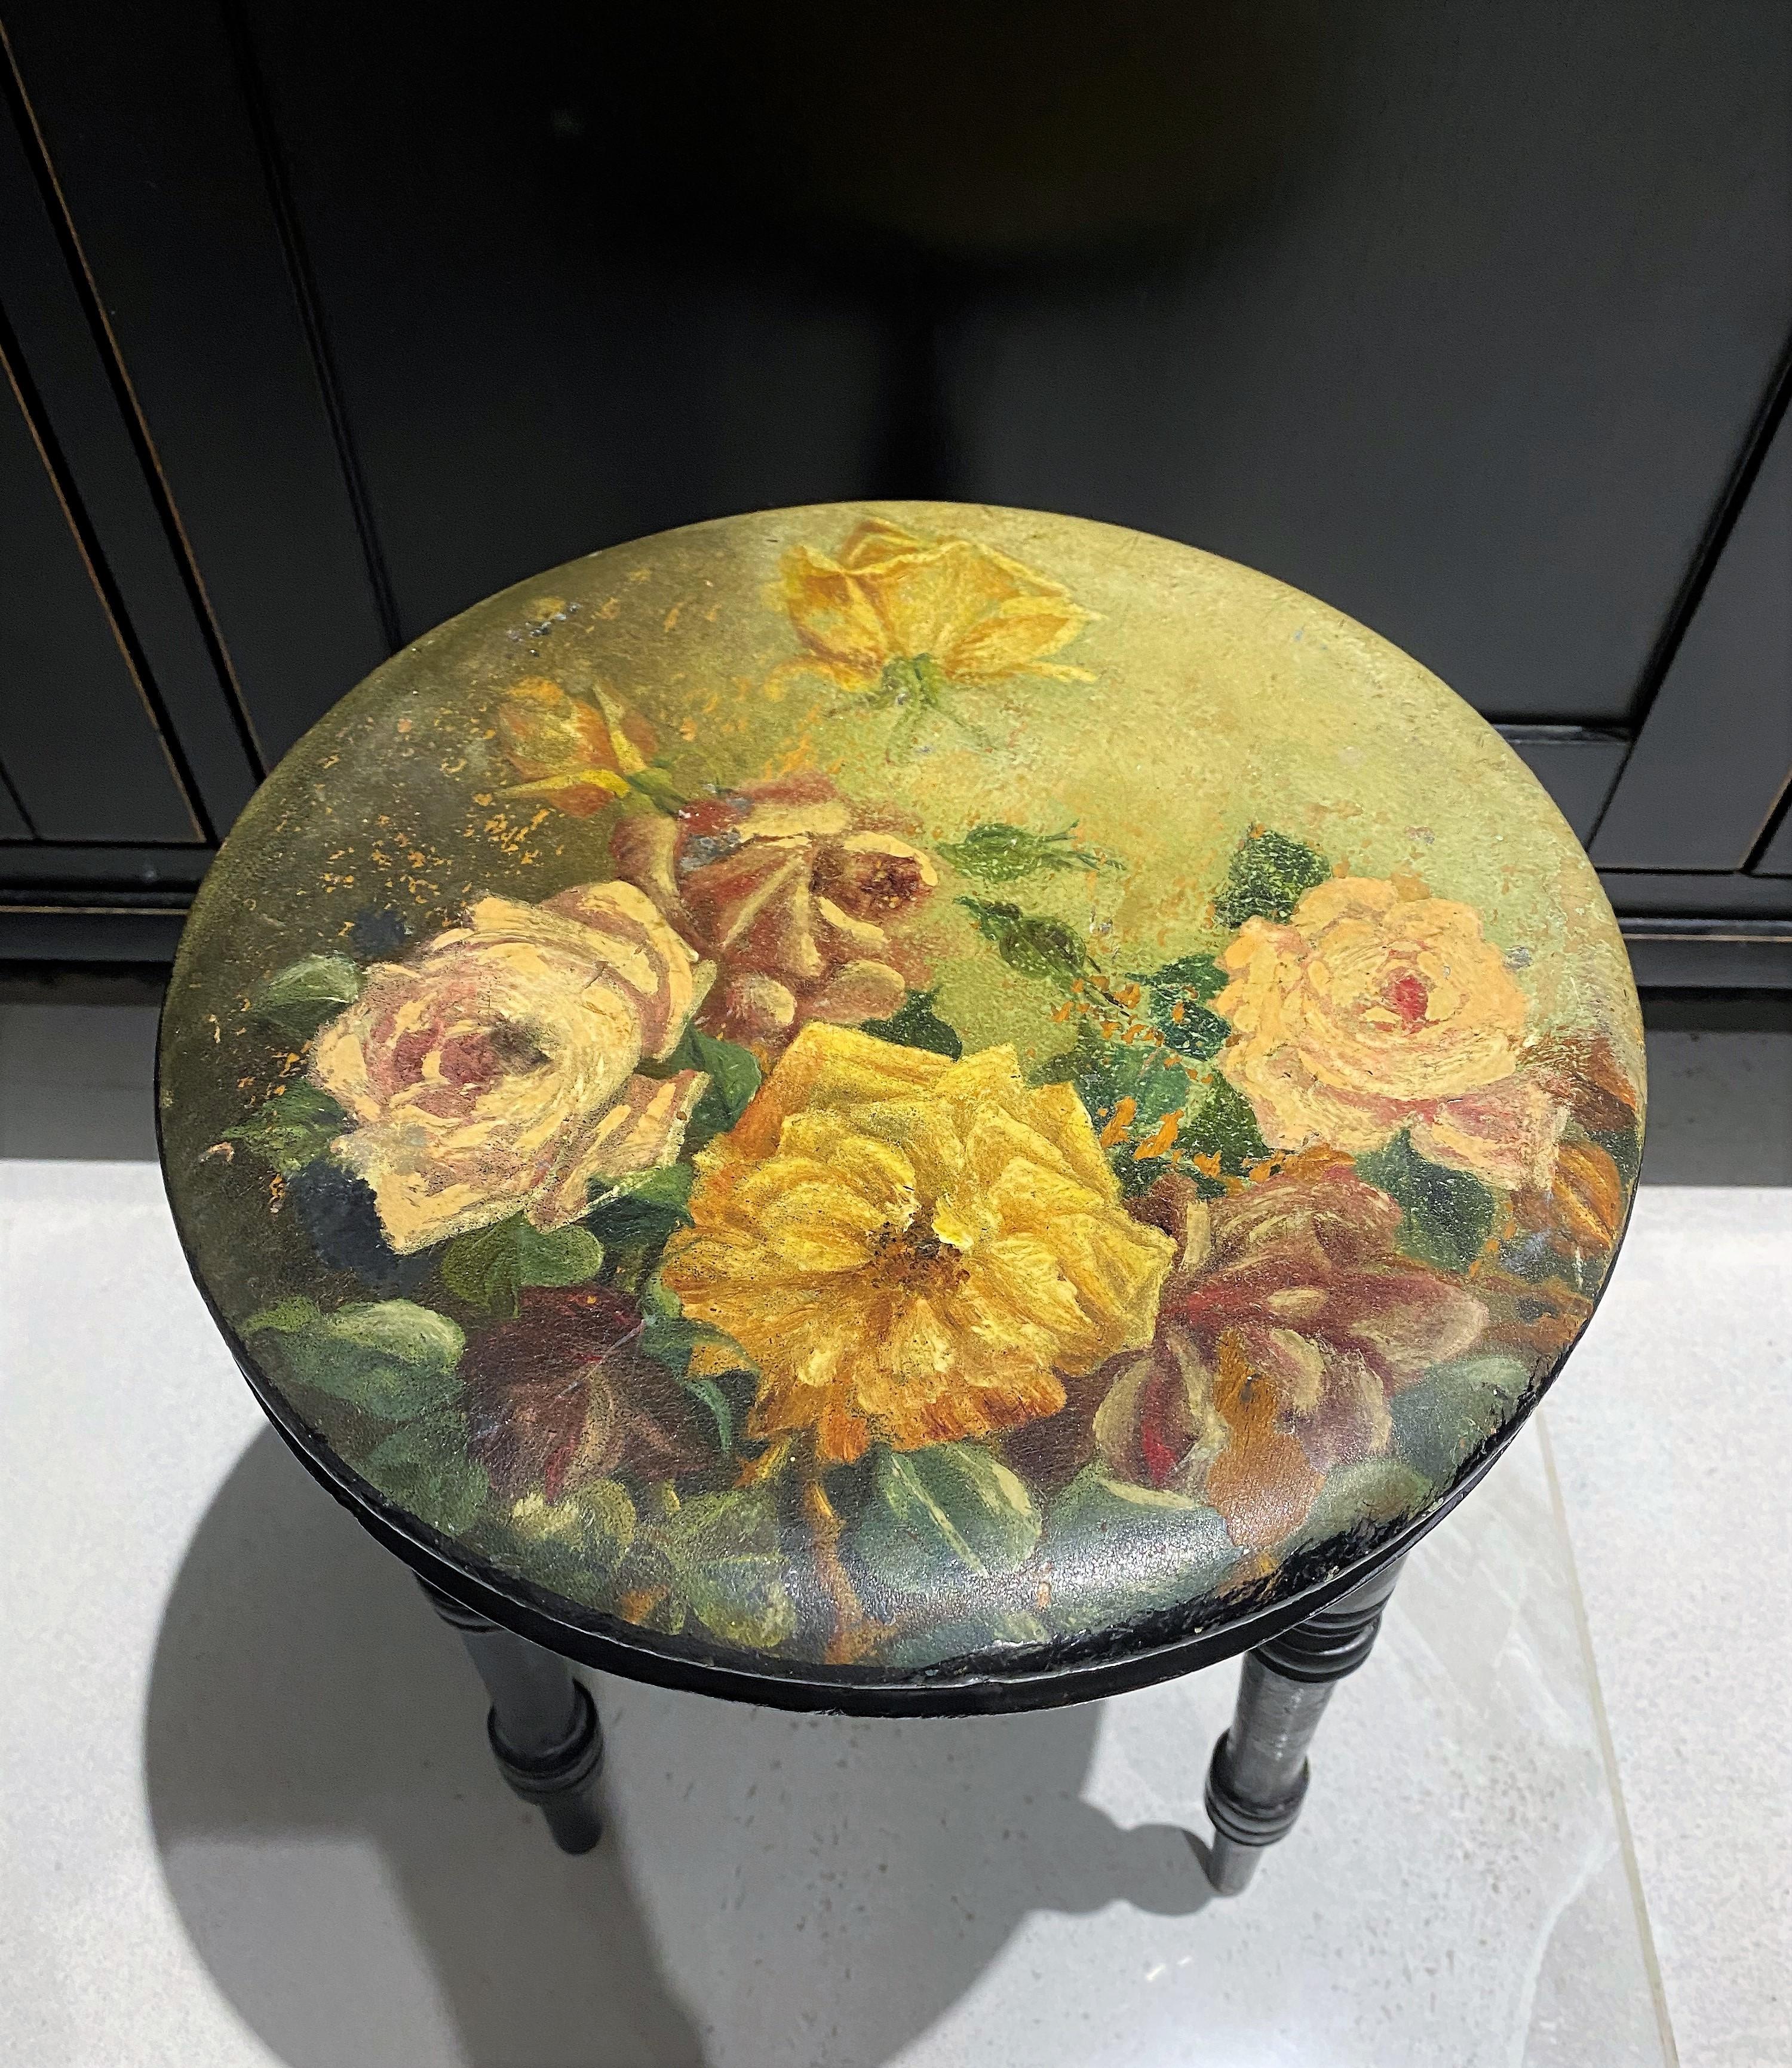 A delightful small Victorian hand painted stool.
Beautiful hand painted floral decoration, a great decorative piece.
In good sound condition.